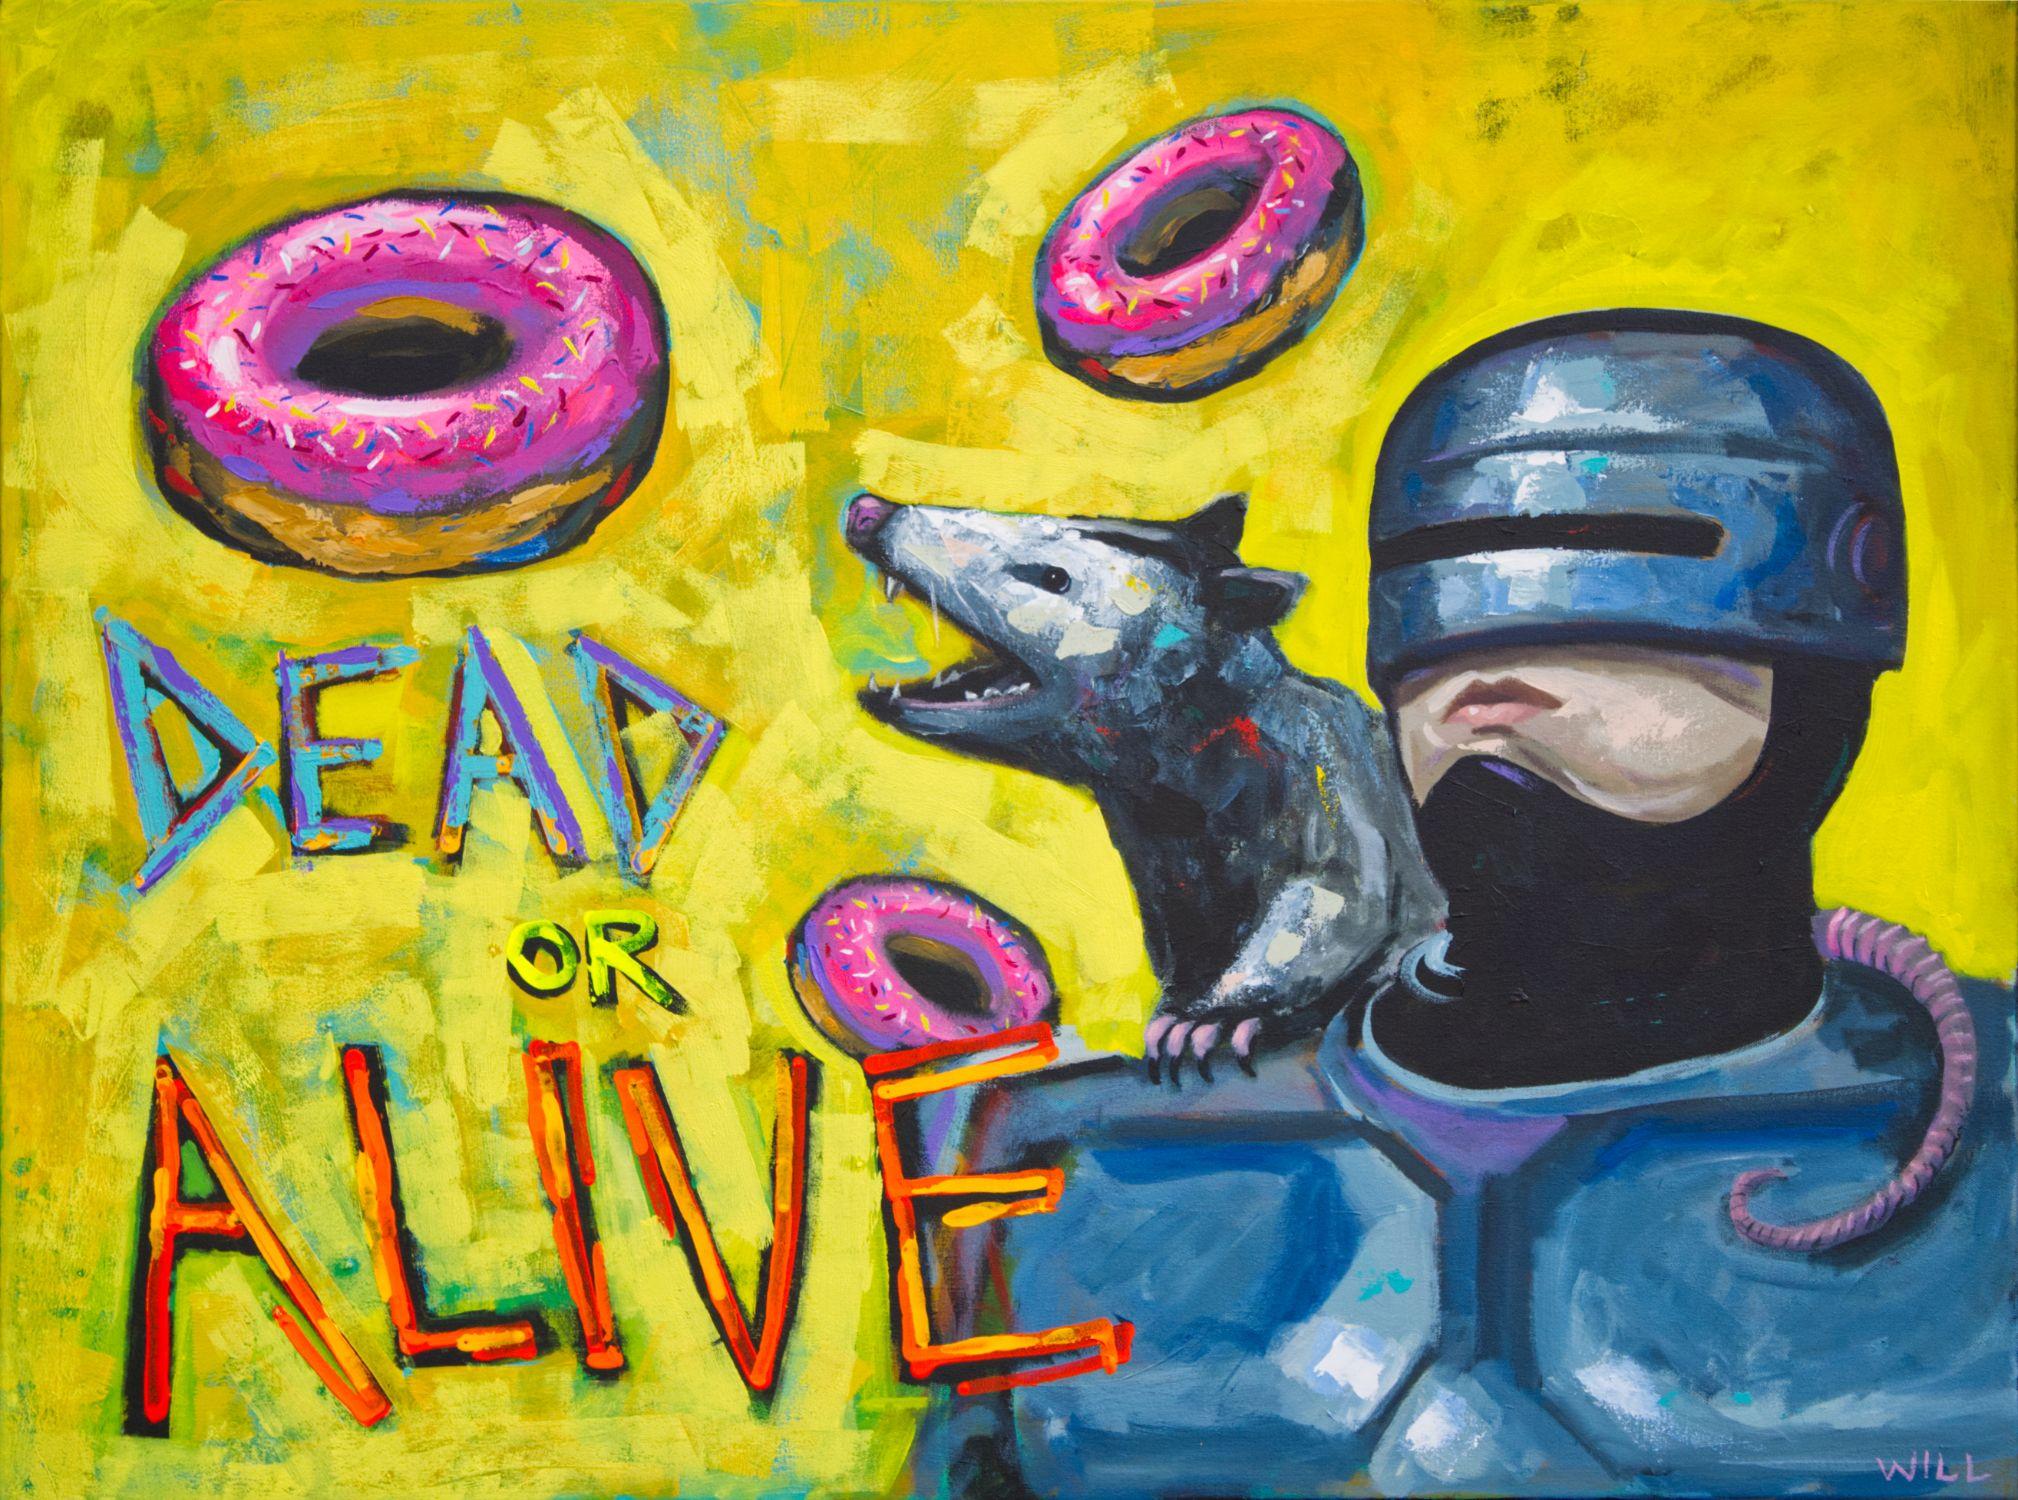   Dead or Alive, You're Coming With Me is a clever take on this wonderfully dystopian near-futuristic film. I imagine a world that has robocops with opossum side kicks (that play dead - get it?) and munch on sprinkled donuts for sustenance.    